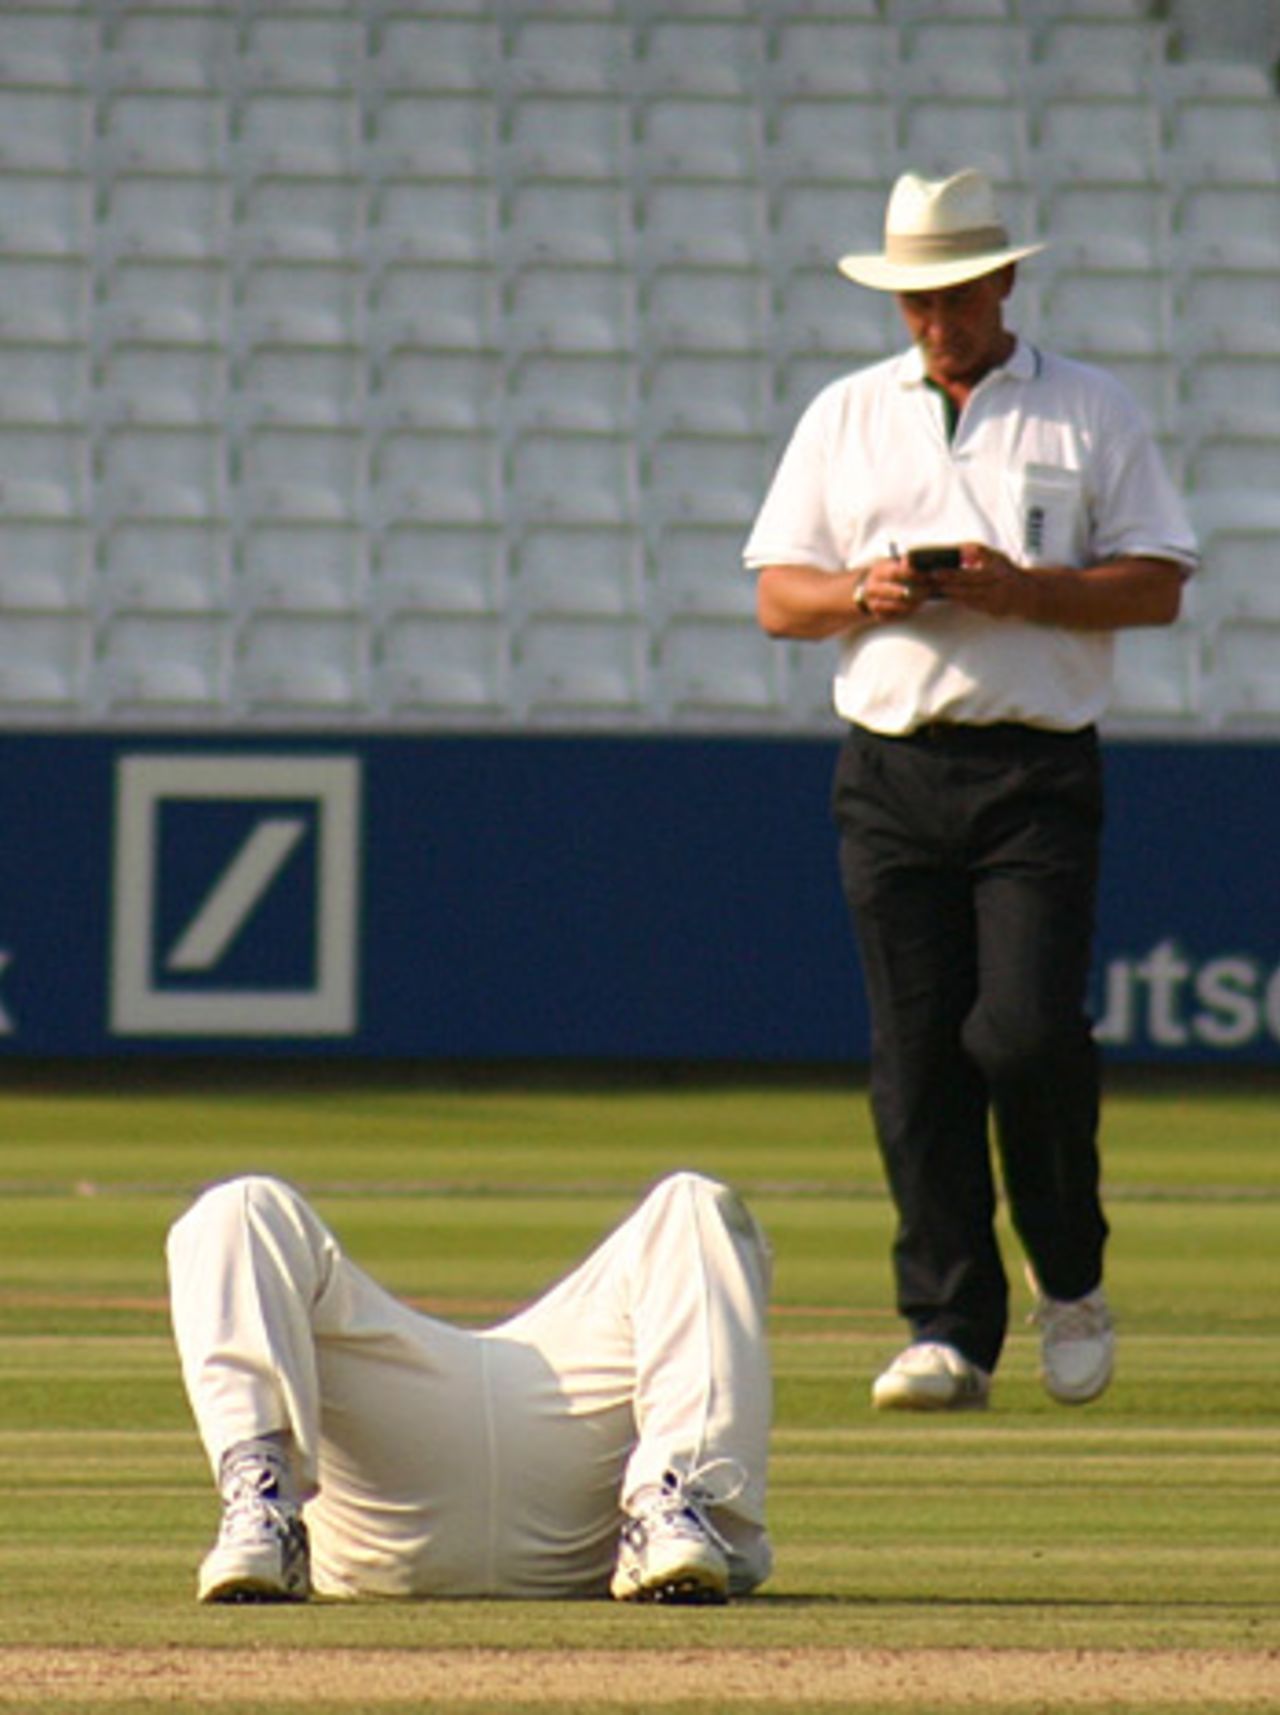 Mushtaq Ahmed prostrate after dropping a caught-and-bowled chance, Middlesex v Sussex, Lord's, August 17, 2005